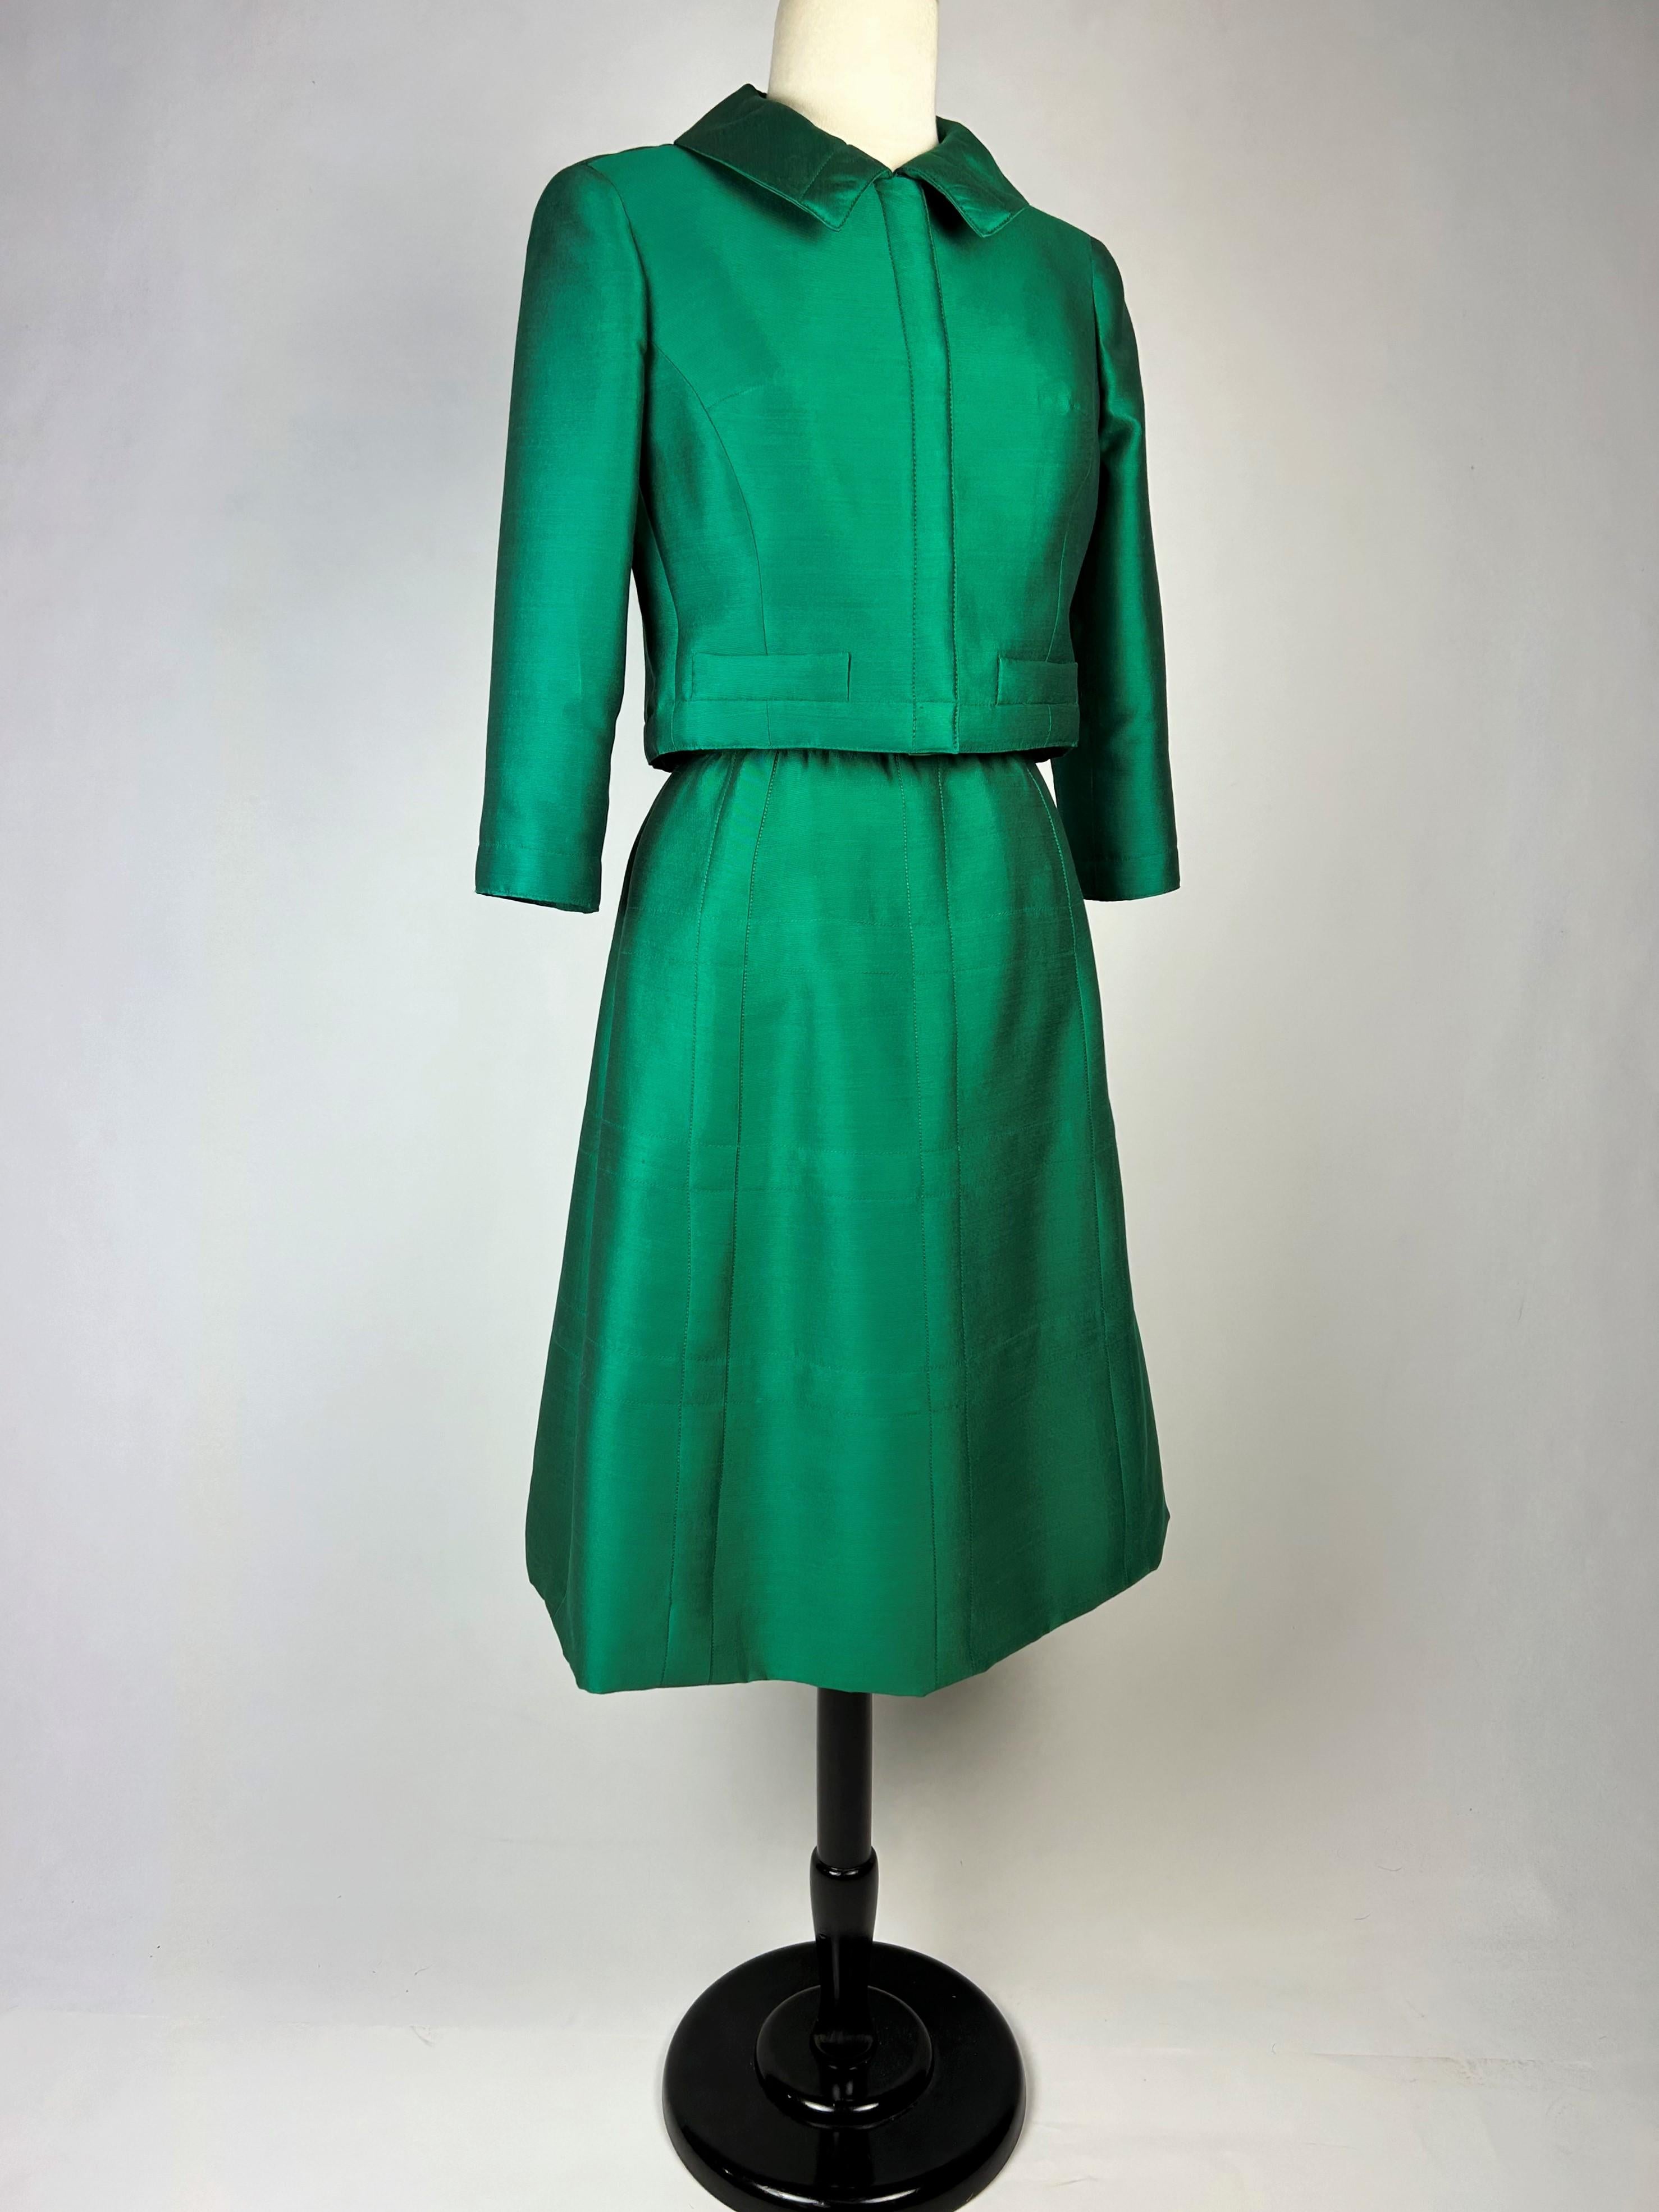 An Emerald Gazar Demi-Couture Skirt Suit by Louis Féraud Circa 1968-1972 For Sale 7